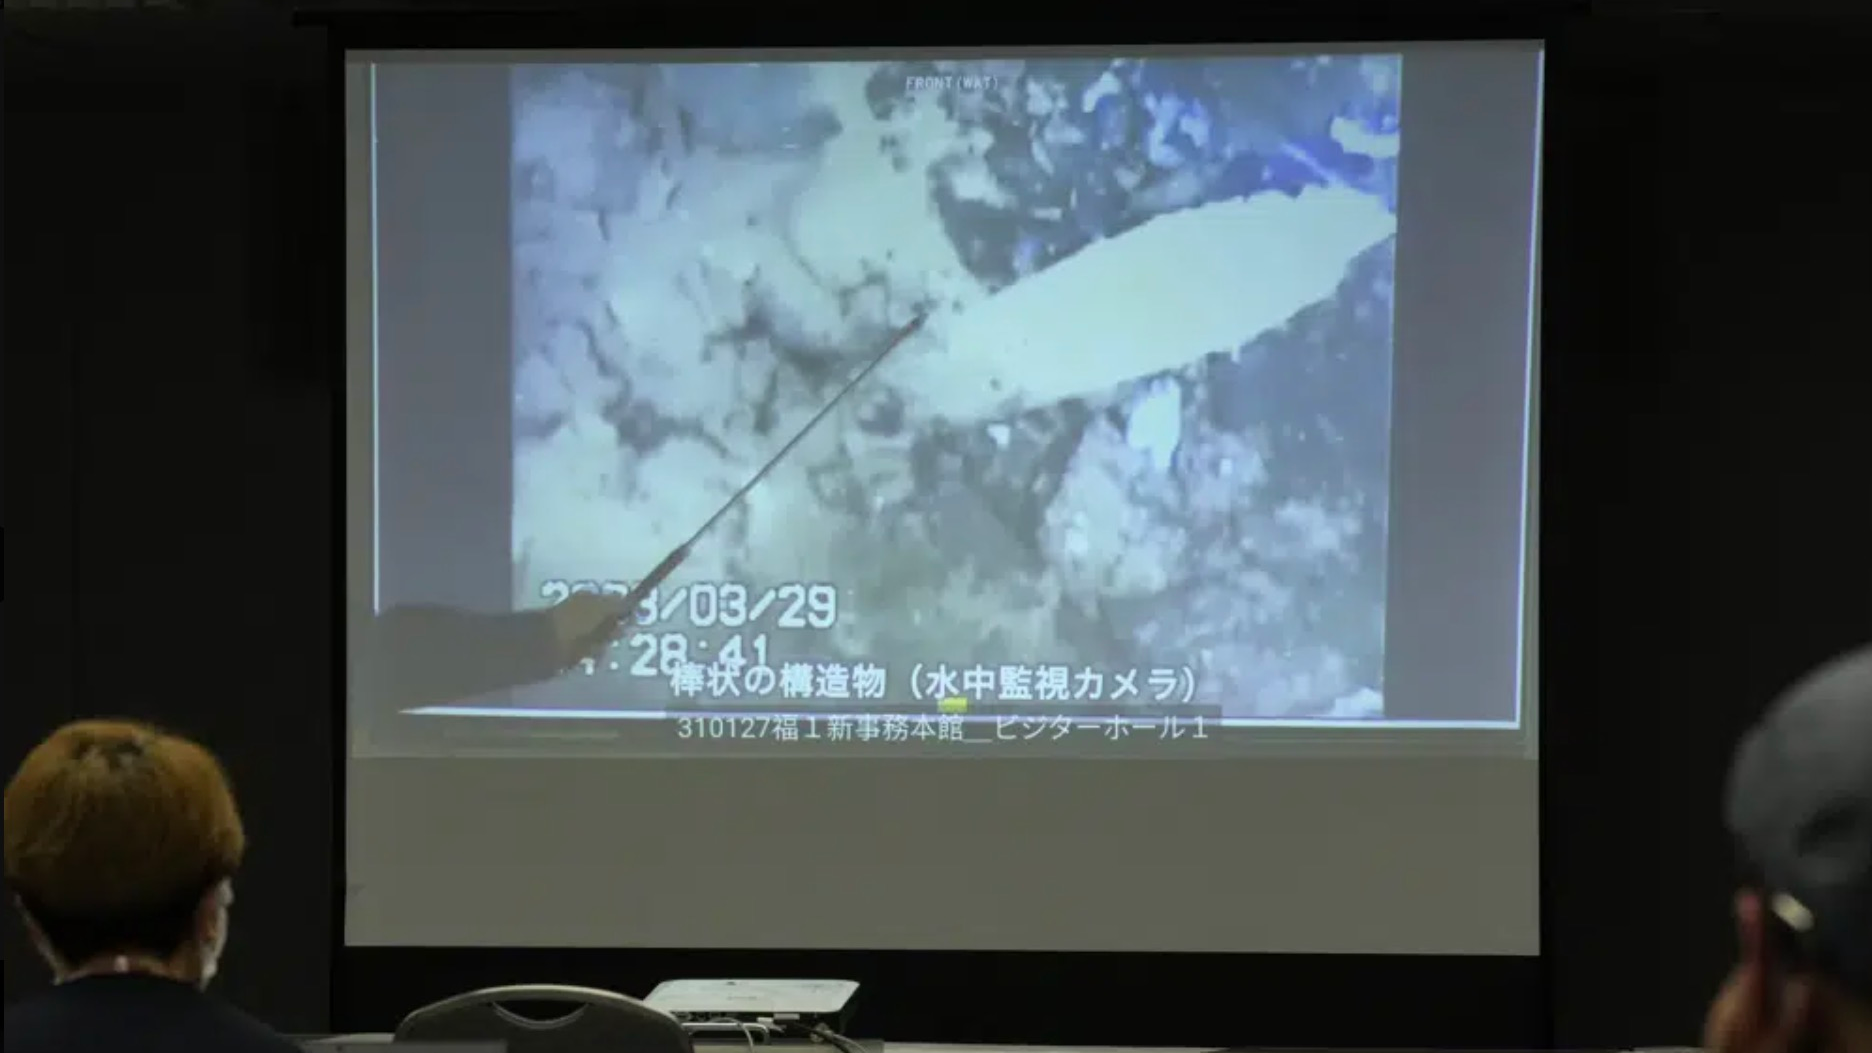 A spokesperson for the TEPCO shows photos captured by a robotic probe inside one of the three melted reactors at the tsunami-wrecked Fukushima nuclear power plant, during a news conference at the TEPCO headquarters in Tokyo, Japan, April 4, 2023. /CFP